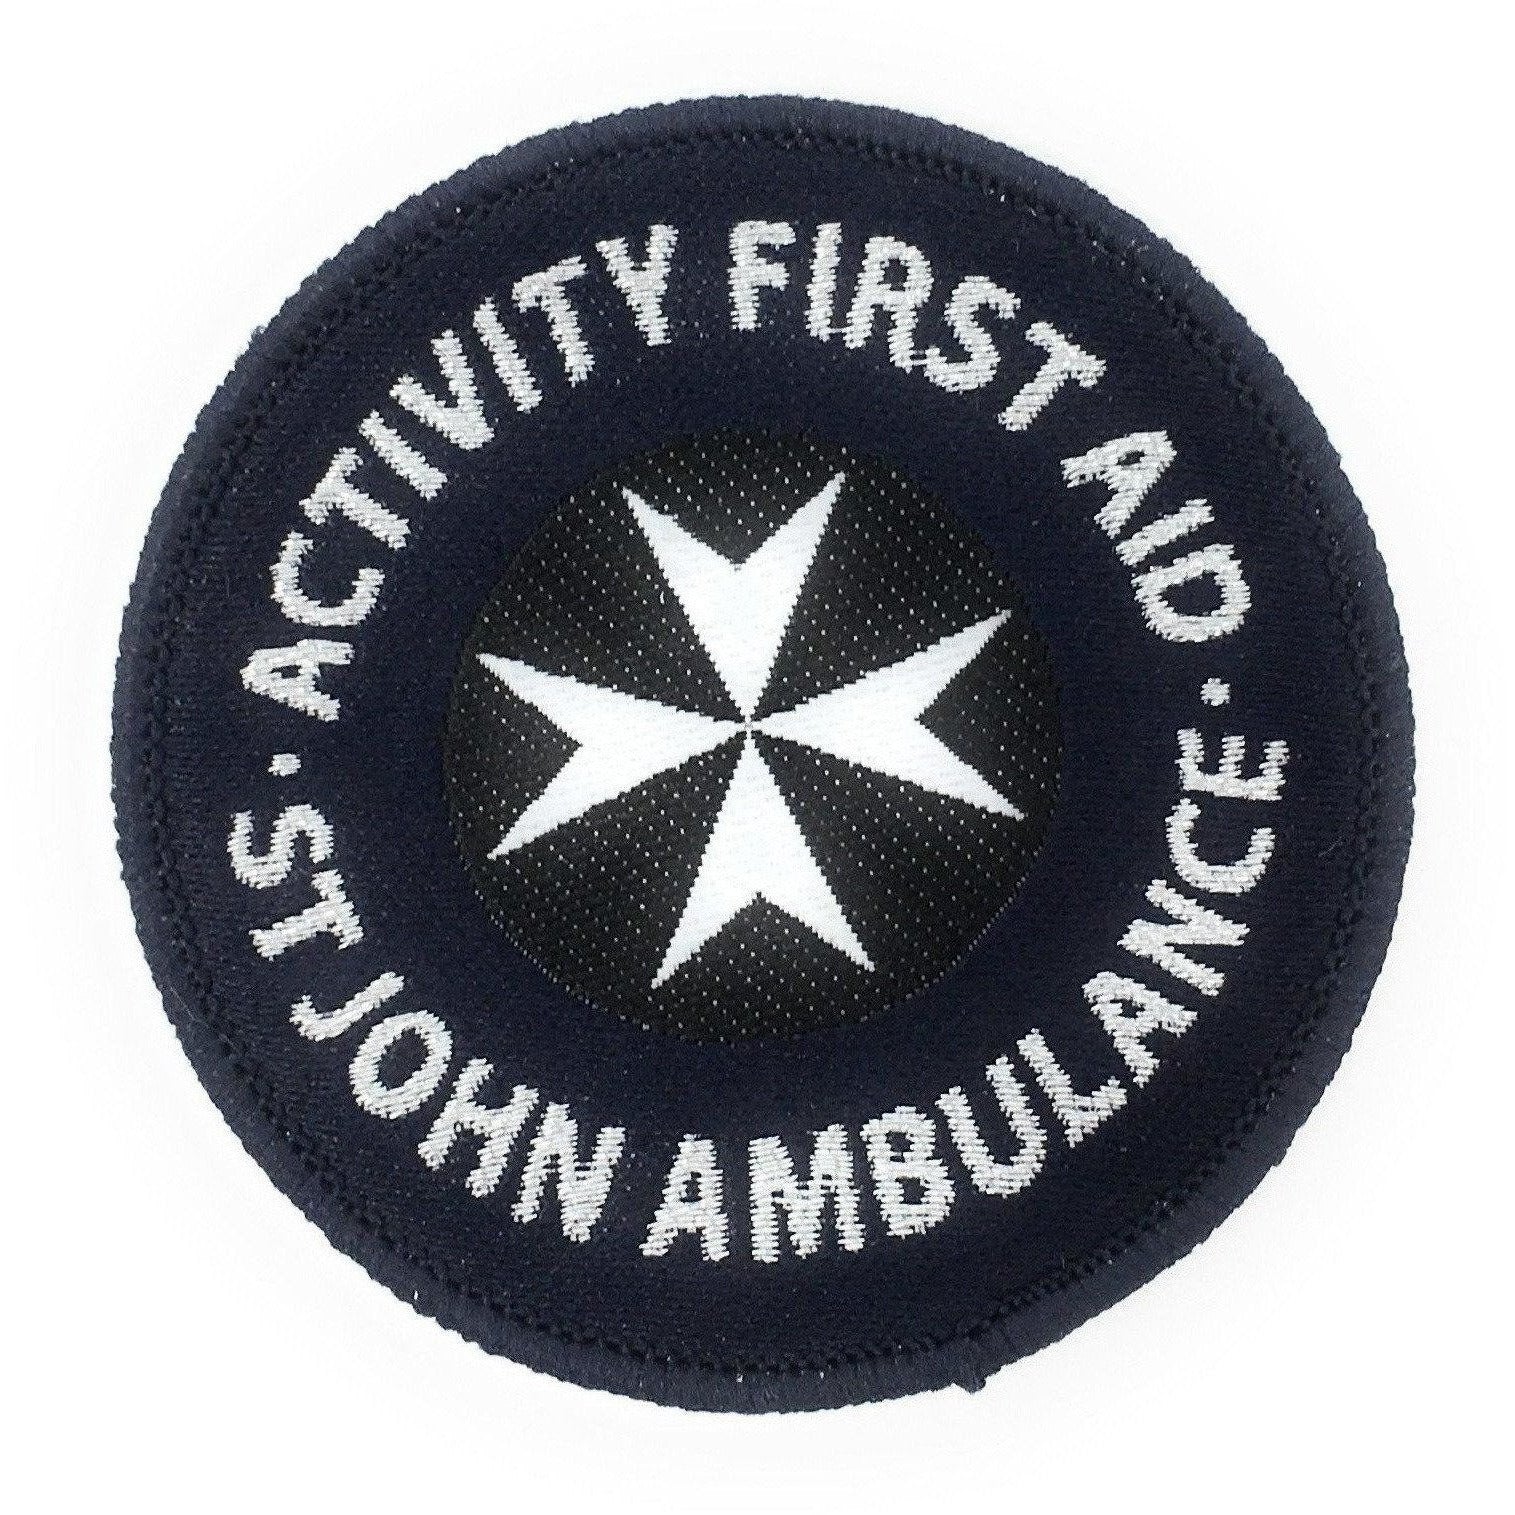 Air Cadets Youth First Aid Badge - Bronze/Silver/Gold | Cadet Kit Shop | Cadet Force Badges